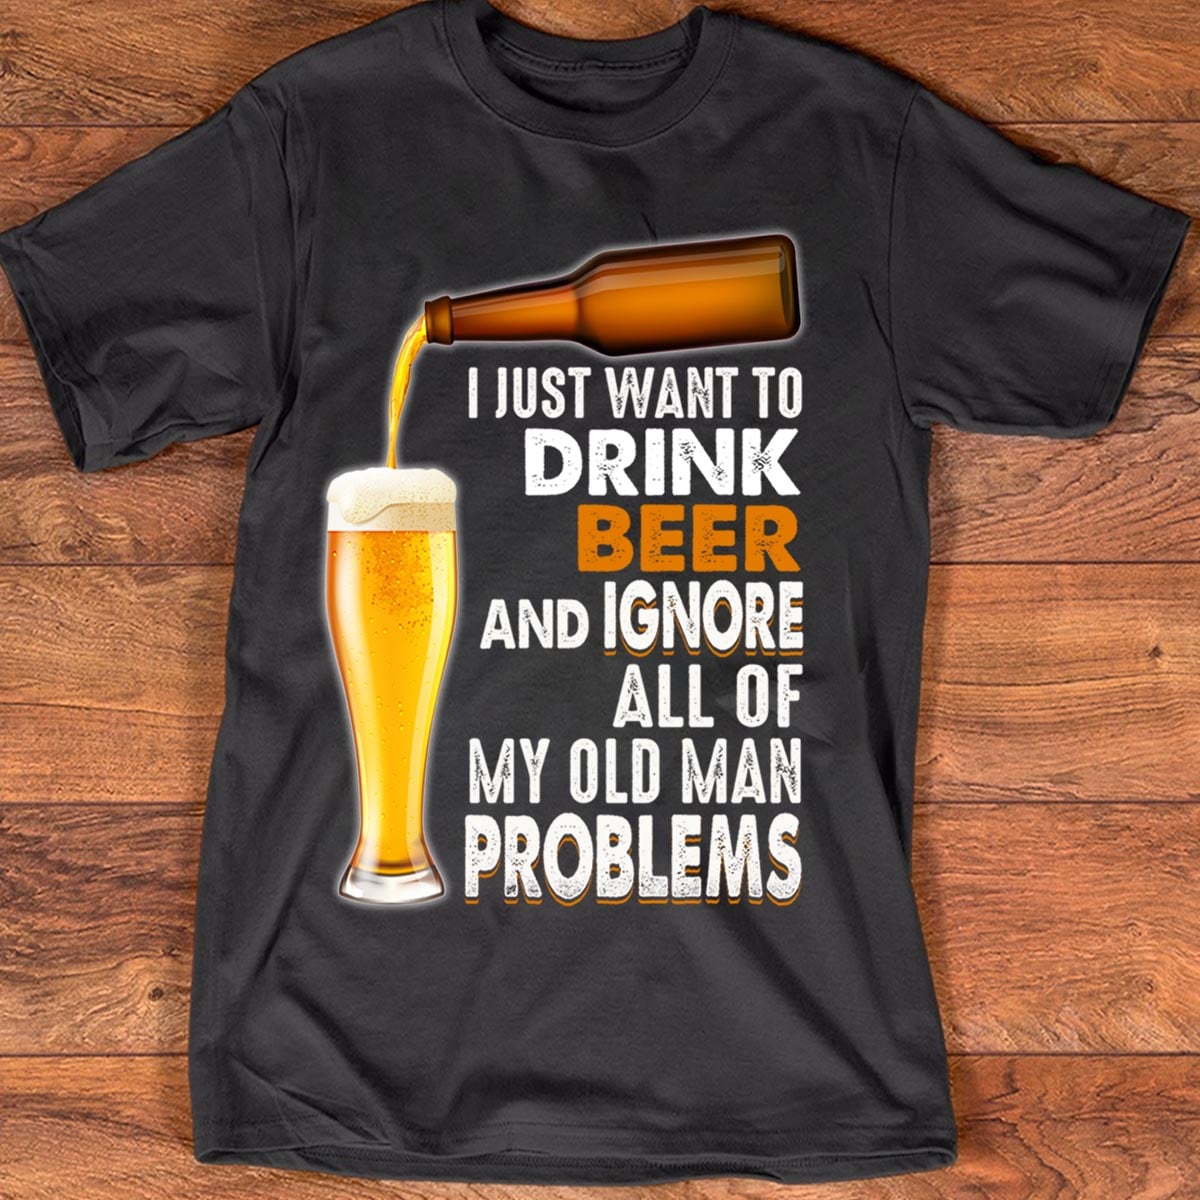 I just want to drink beer and ignore all of my old man problems - Cup of beer, beer lover